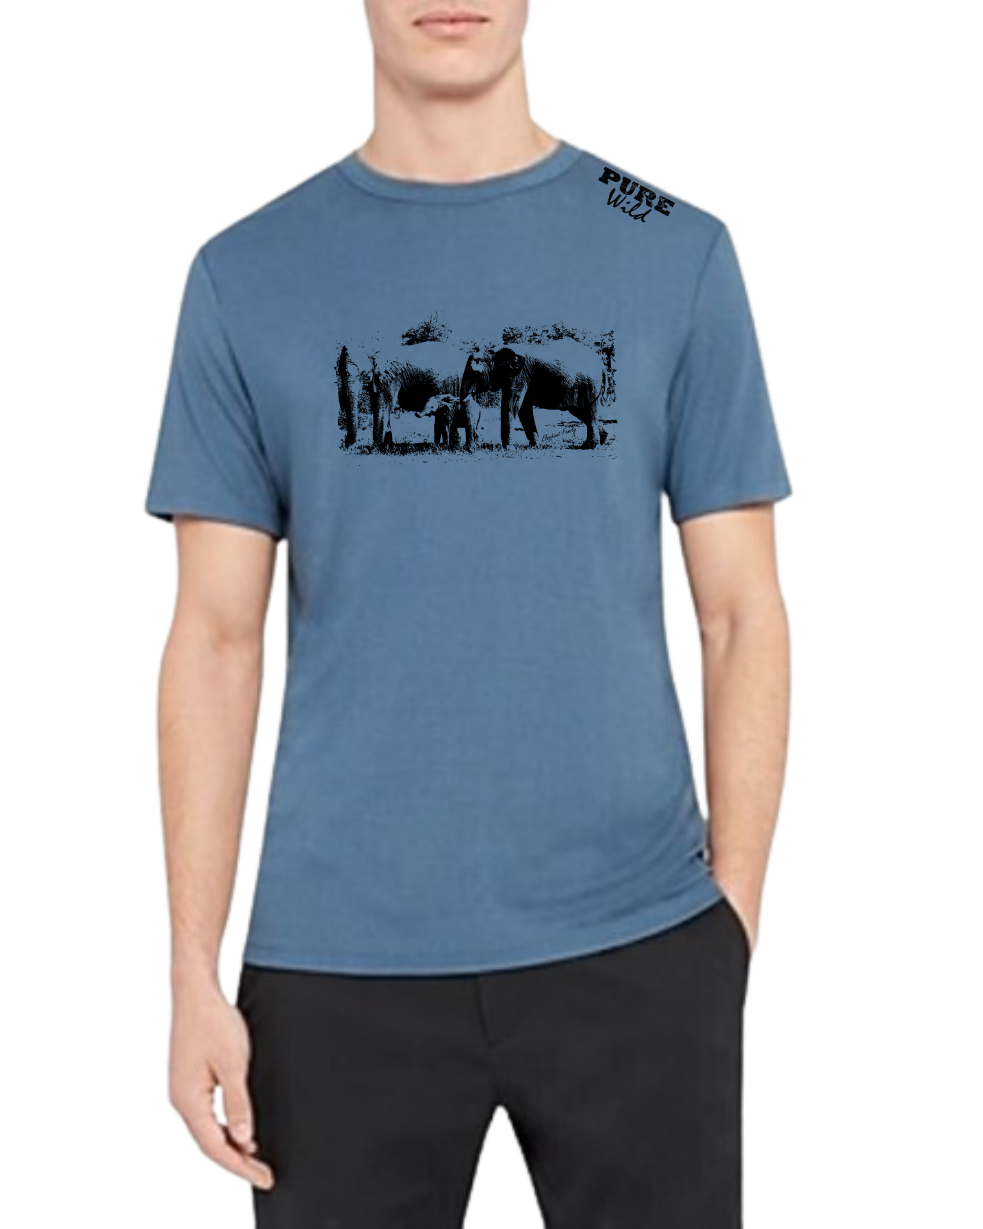 Elephant Family T-Shirt For A Real Man